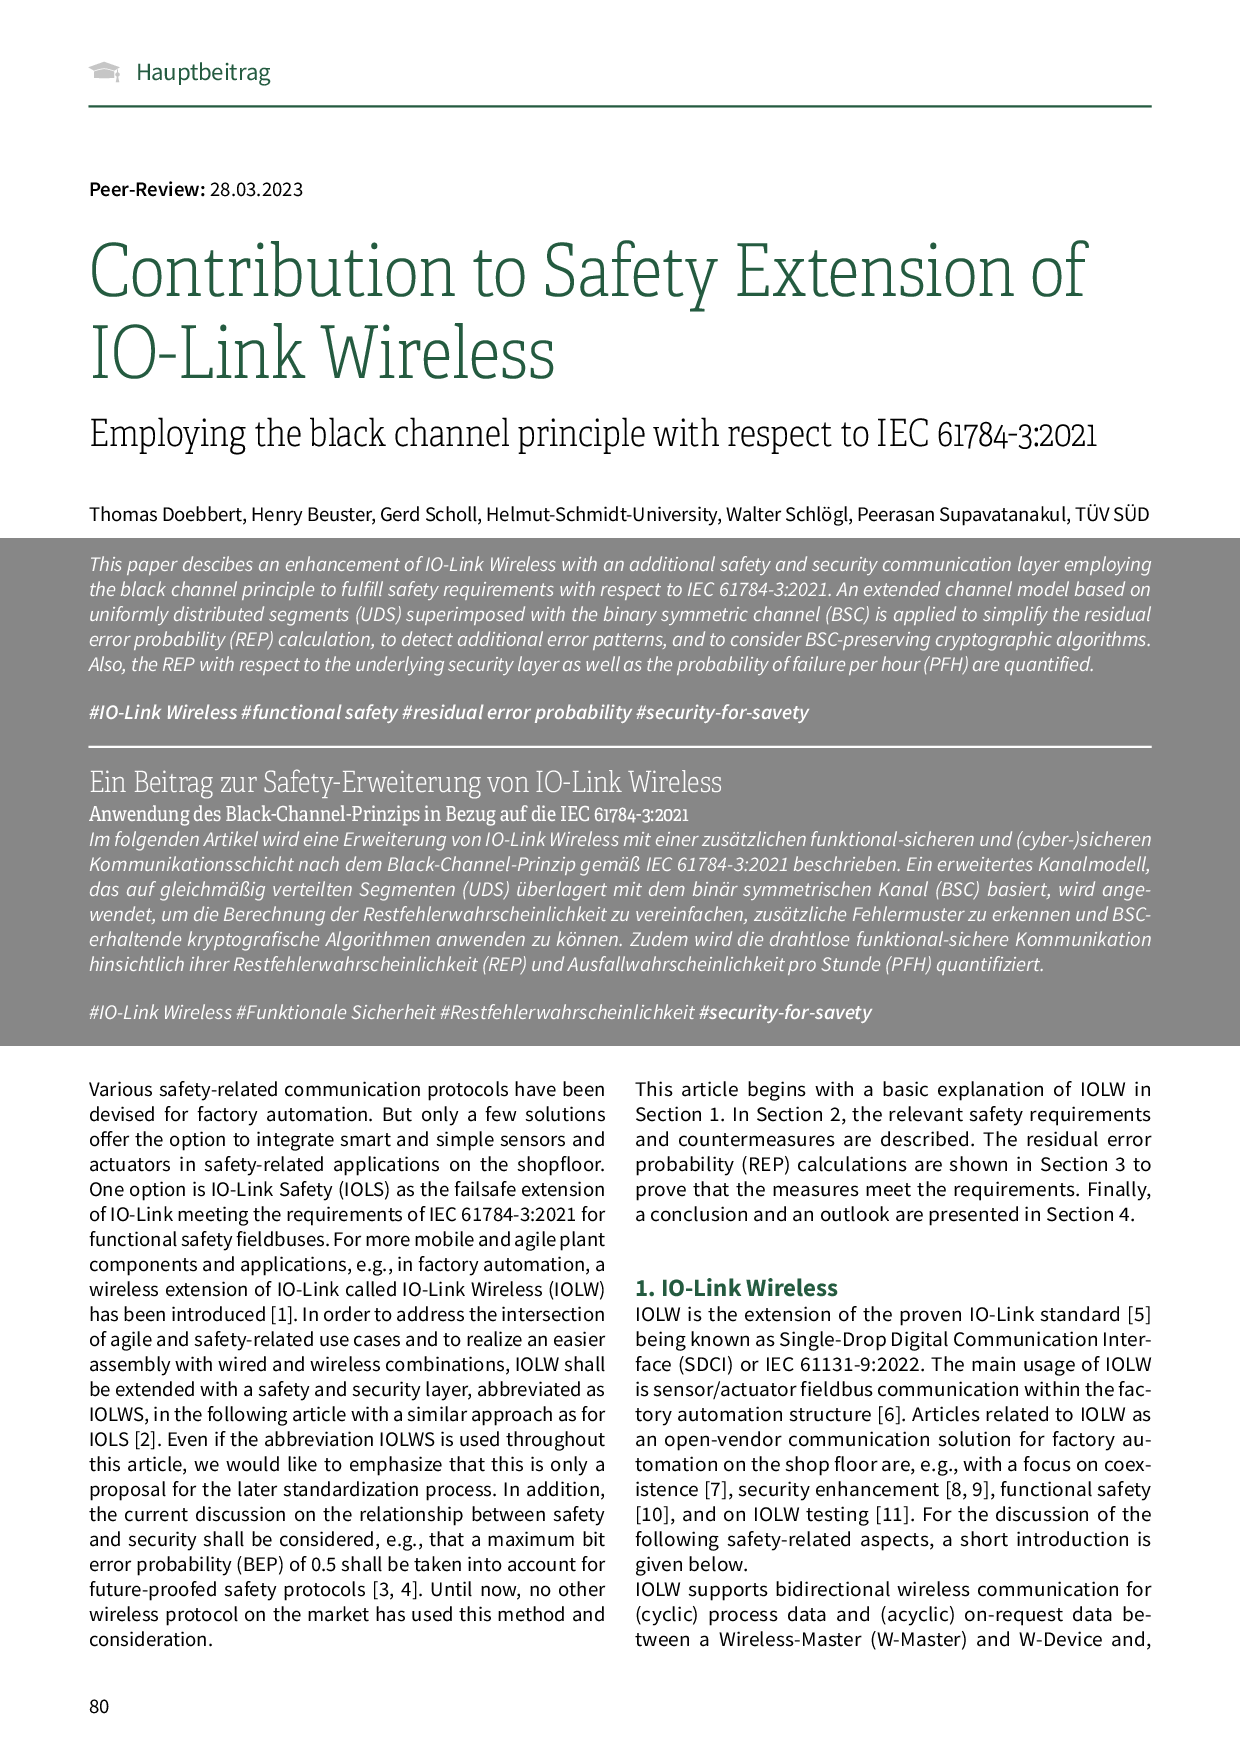 Contribution to Safety Extension of IO-Link Wireless